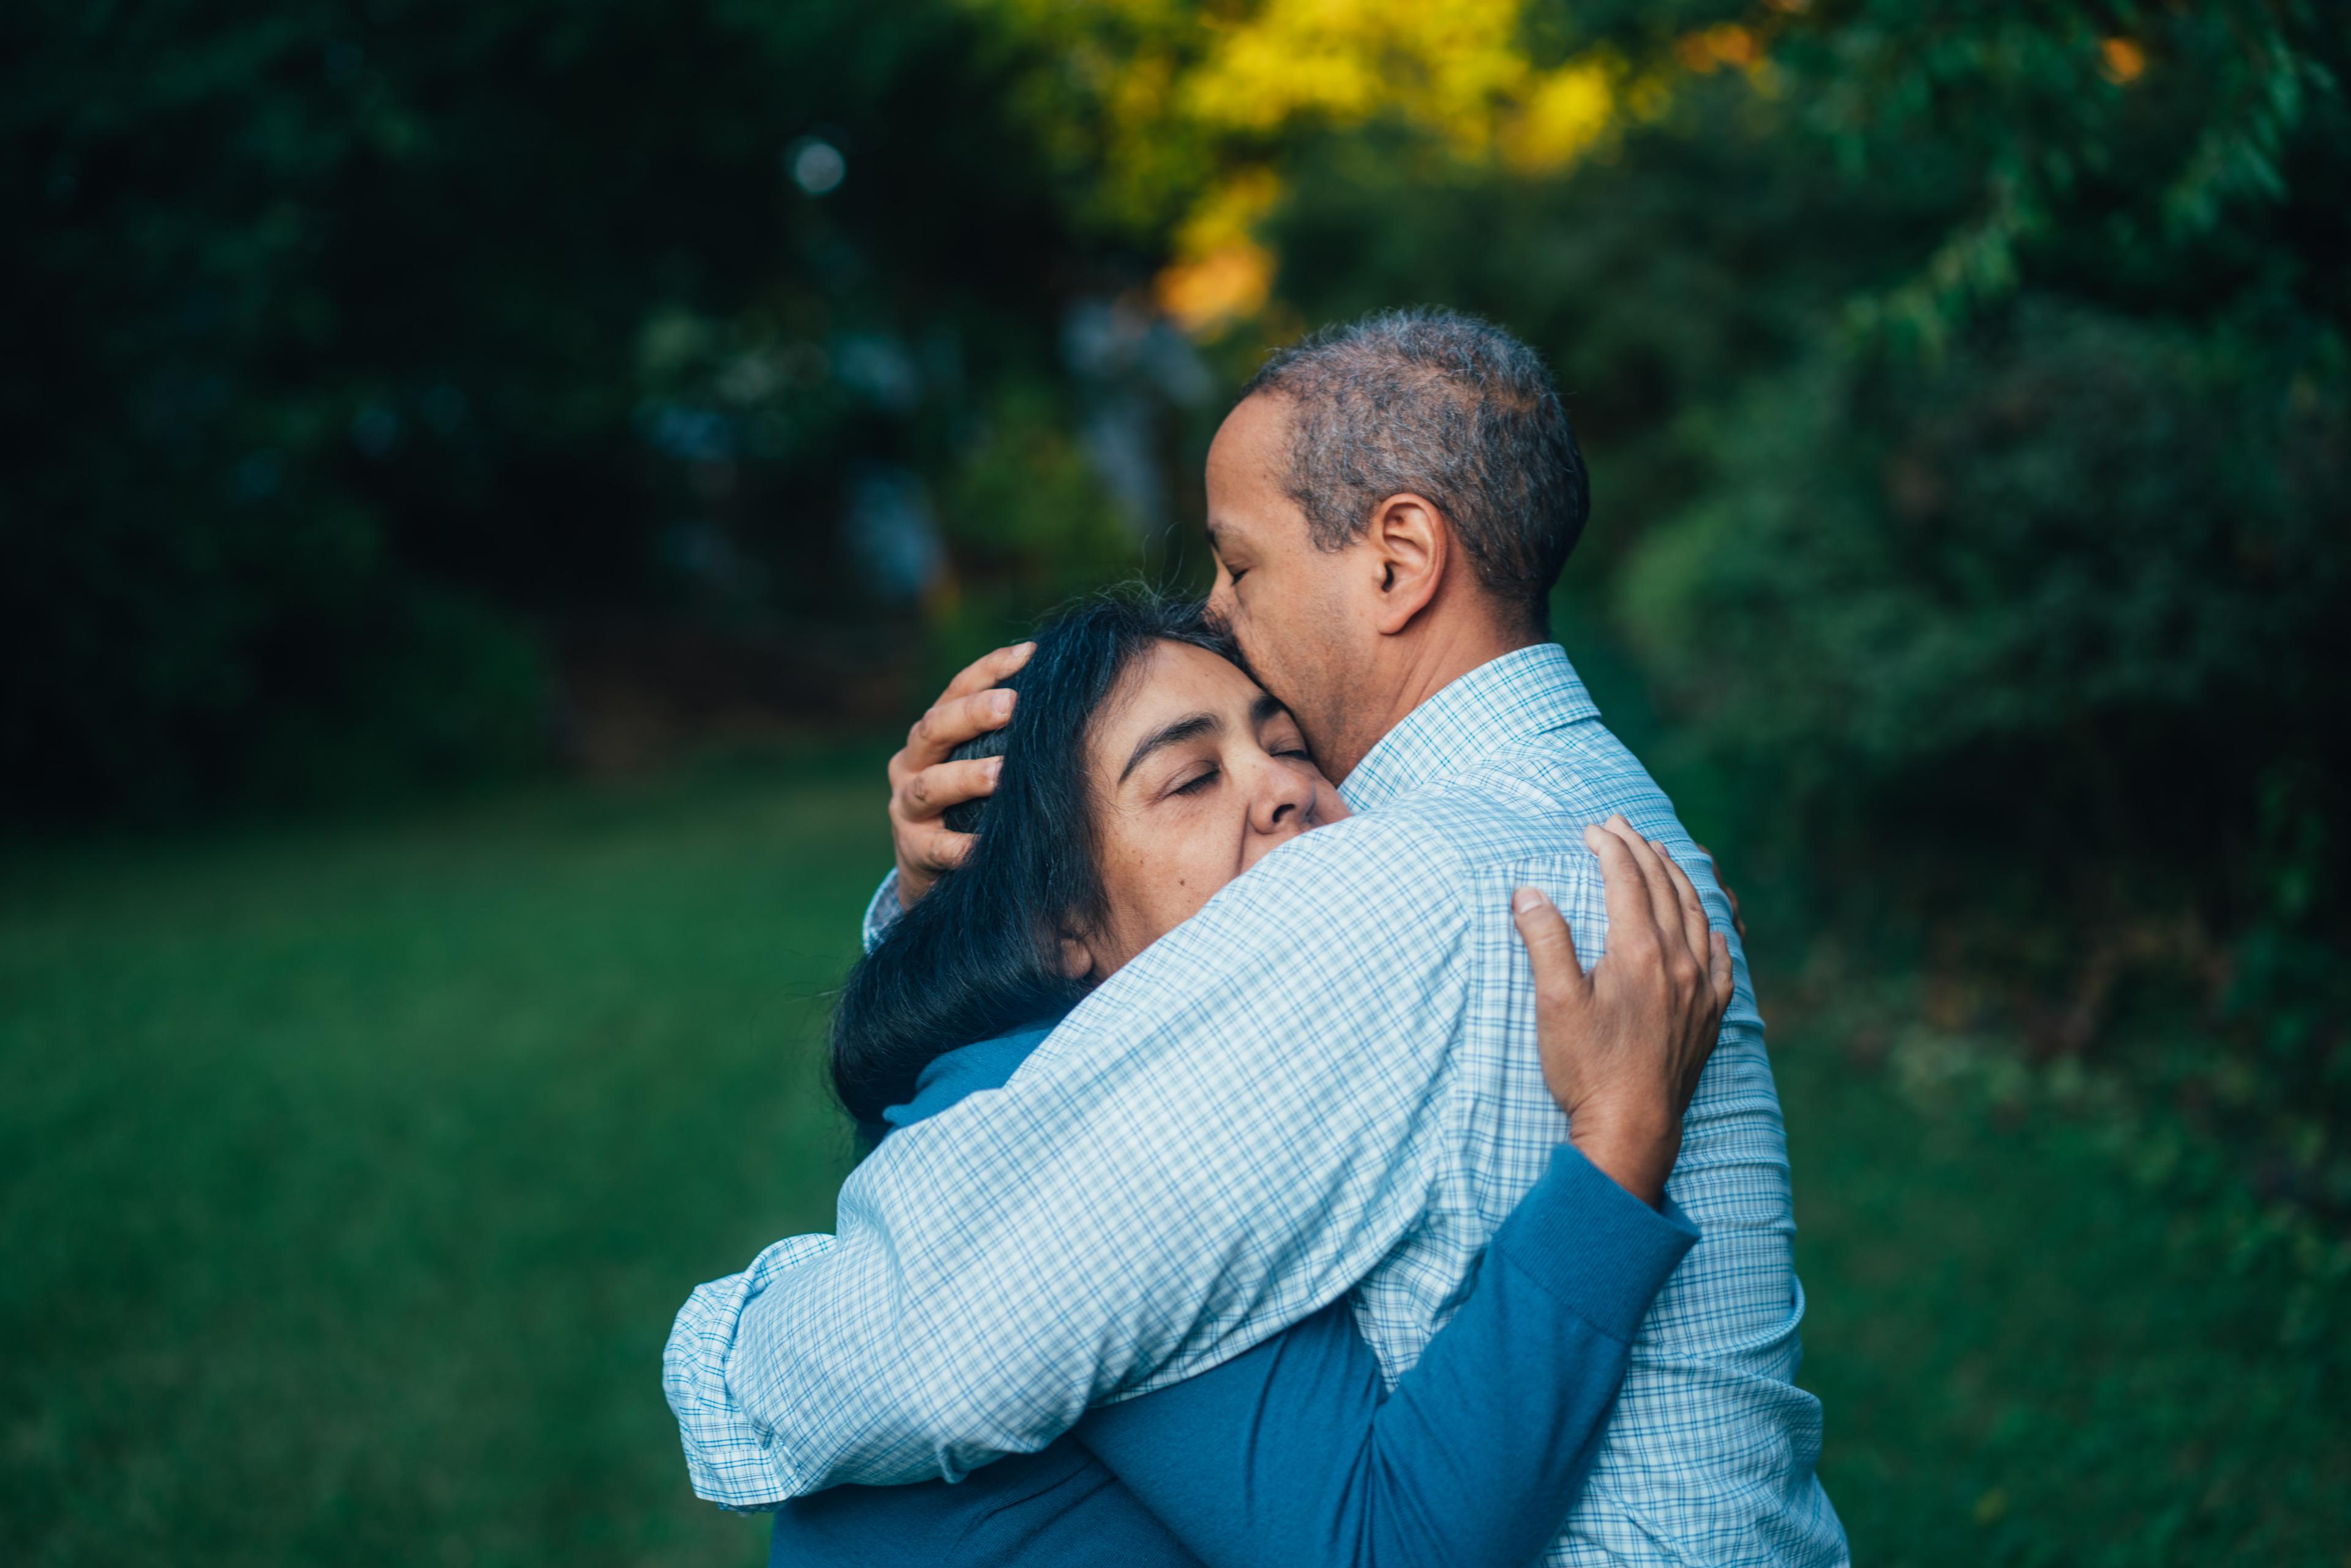 A man and a woman hug one another while outside in a green yard